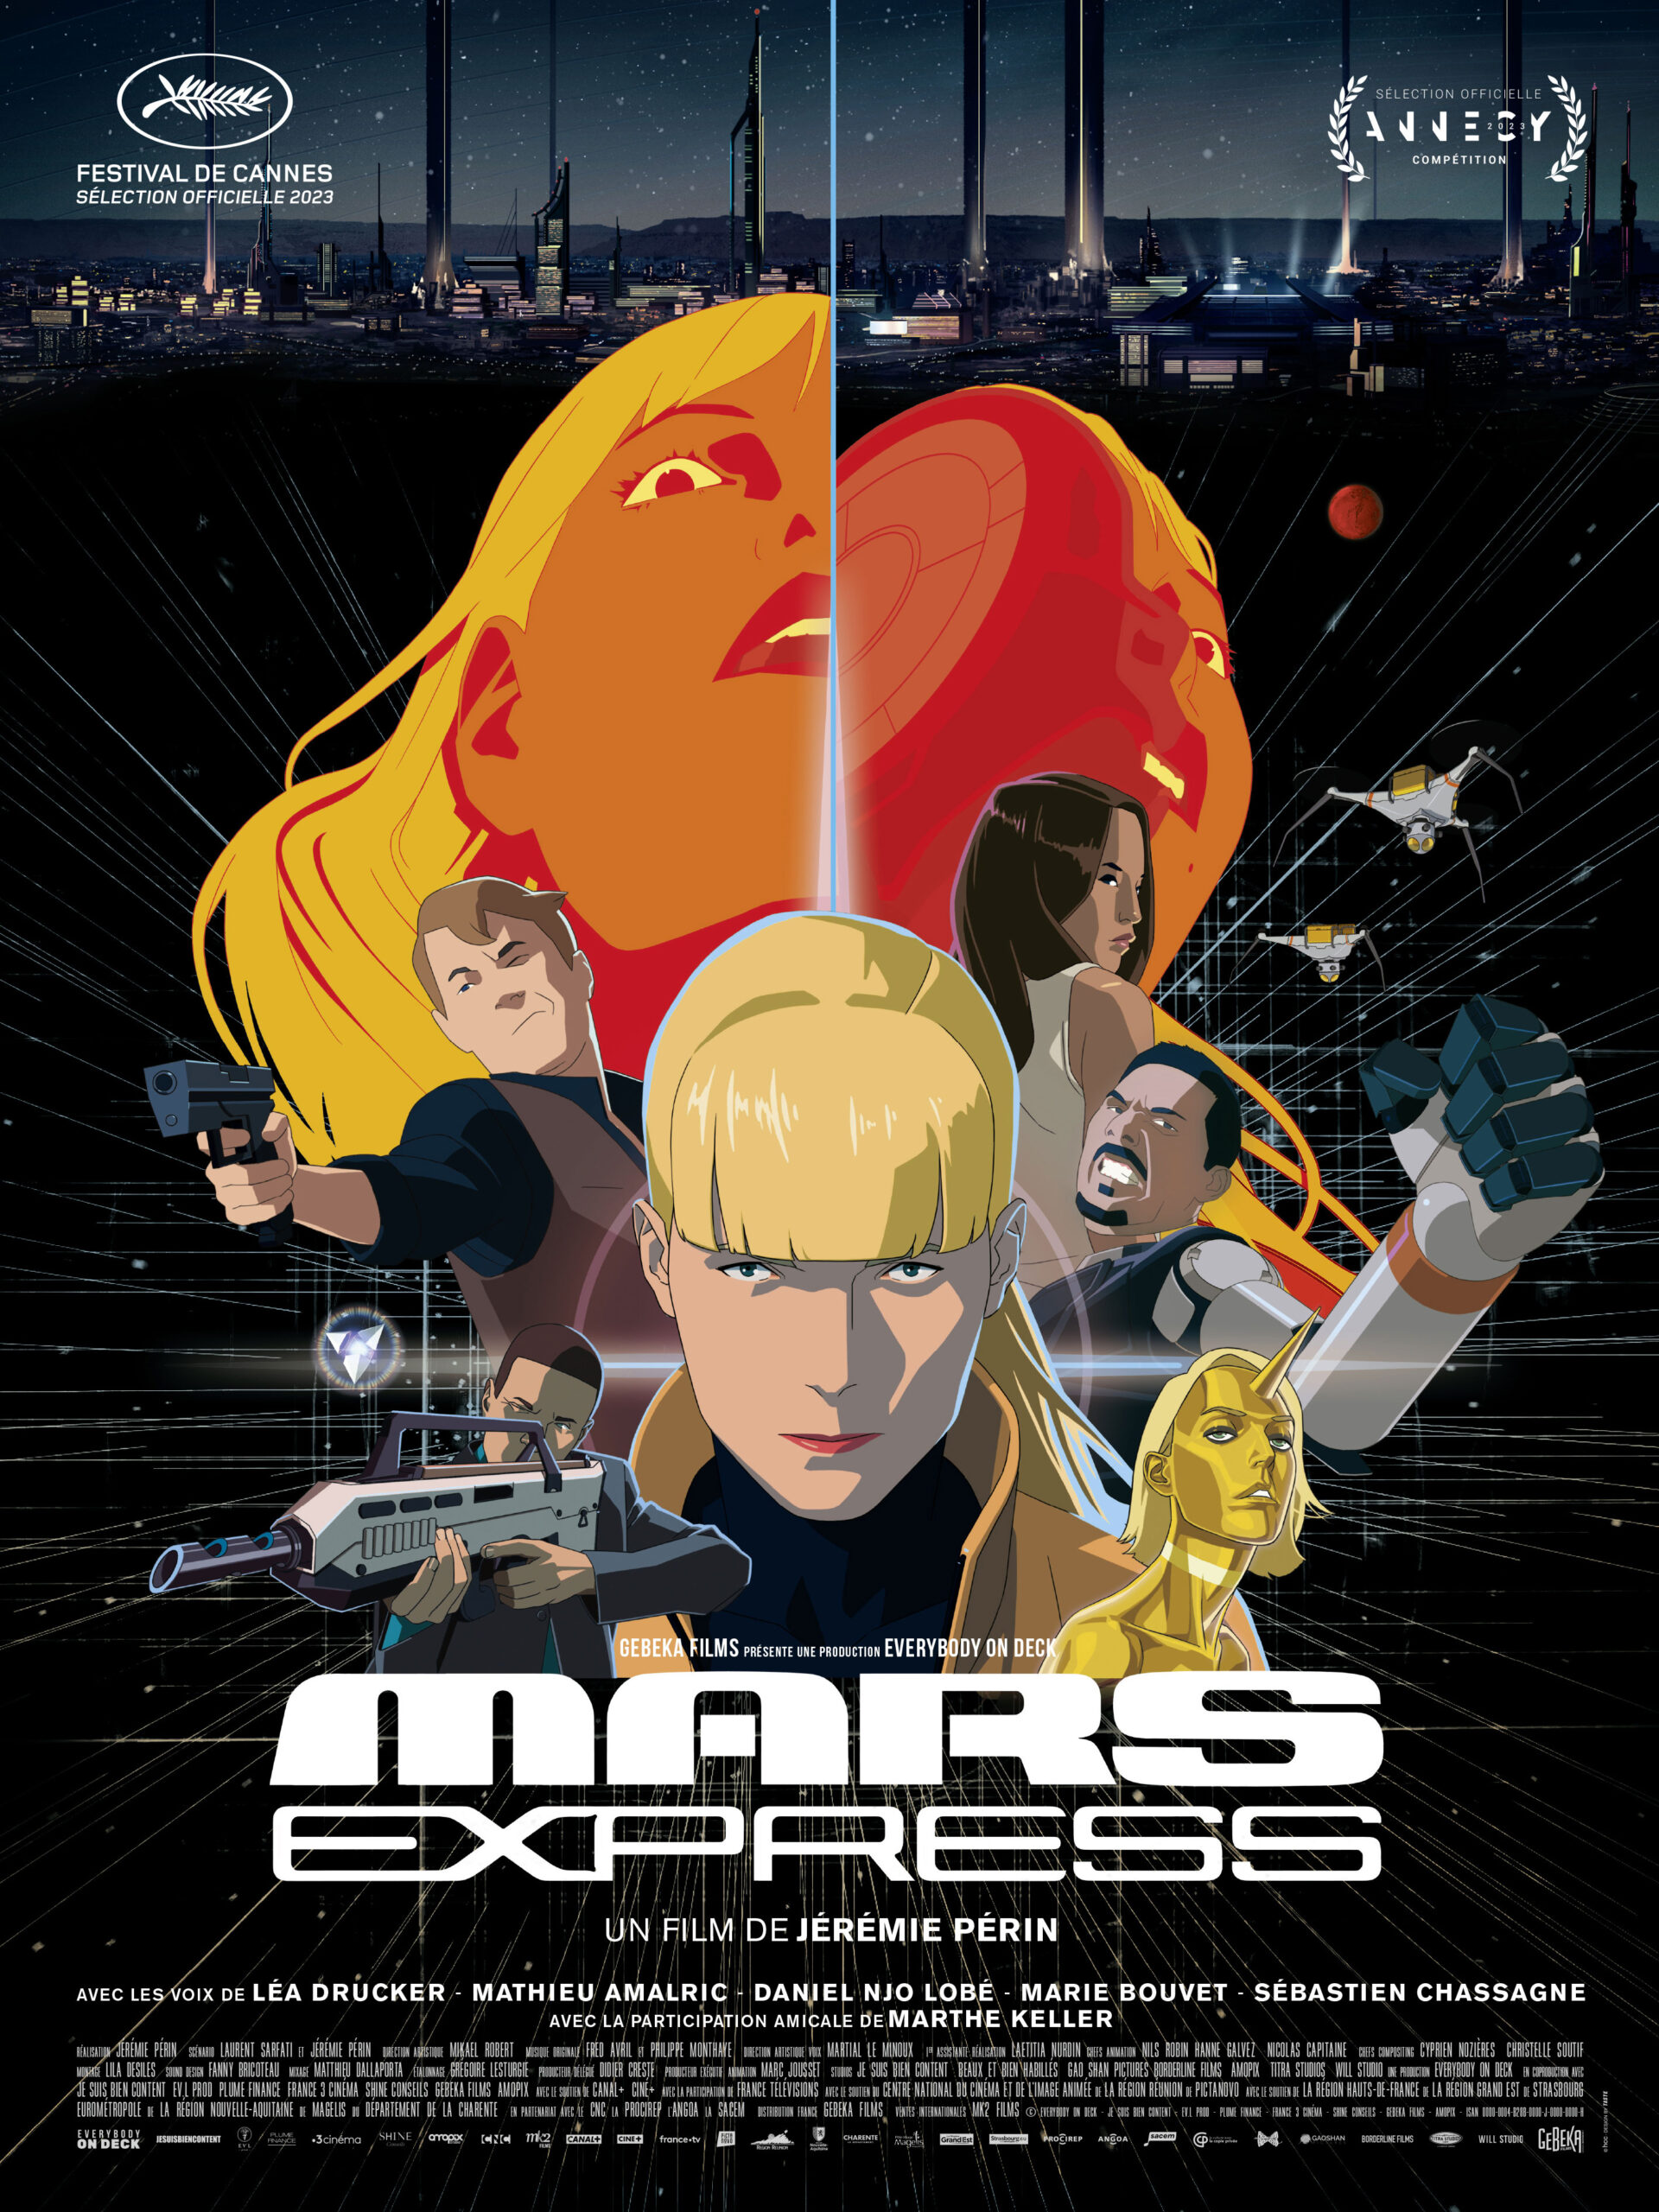 MARS EXPRESS, Bande Annonce Officielle HD